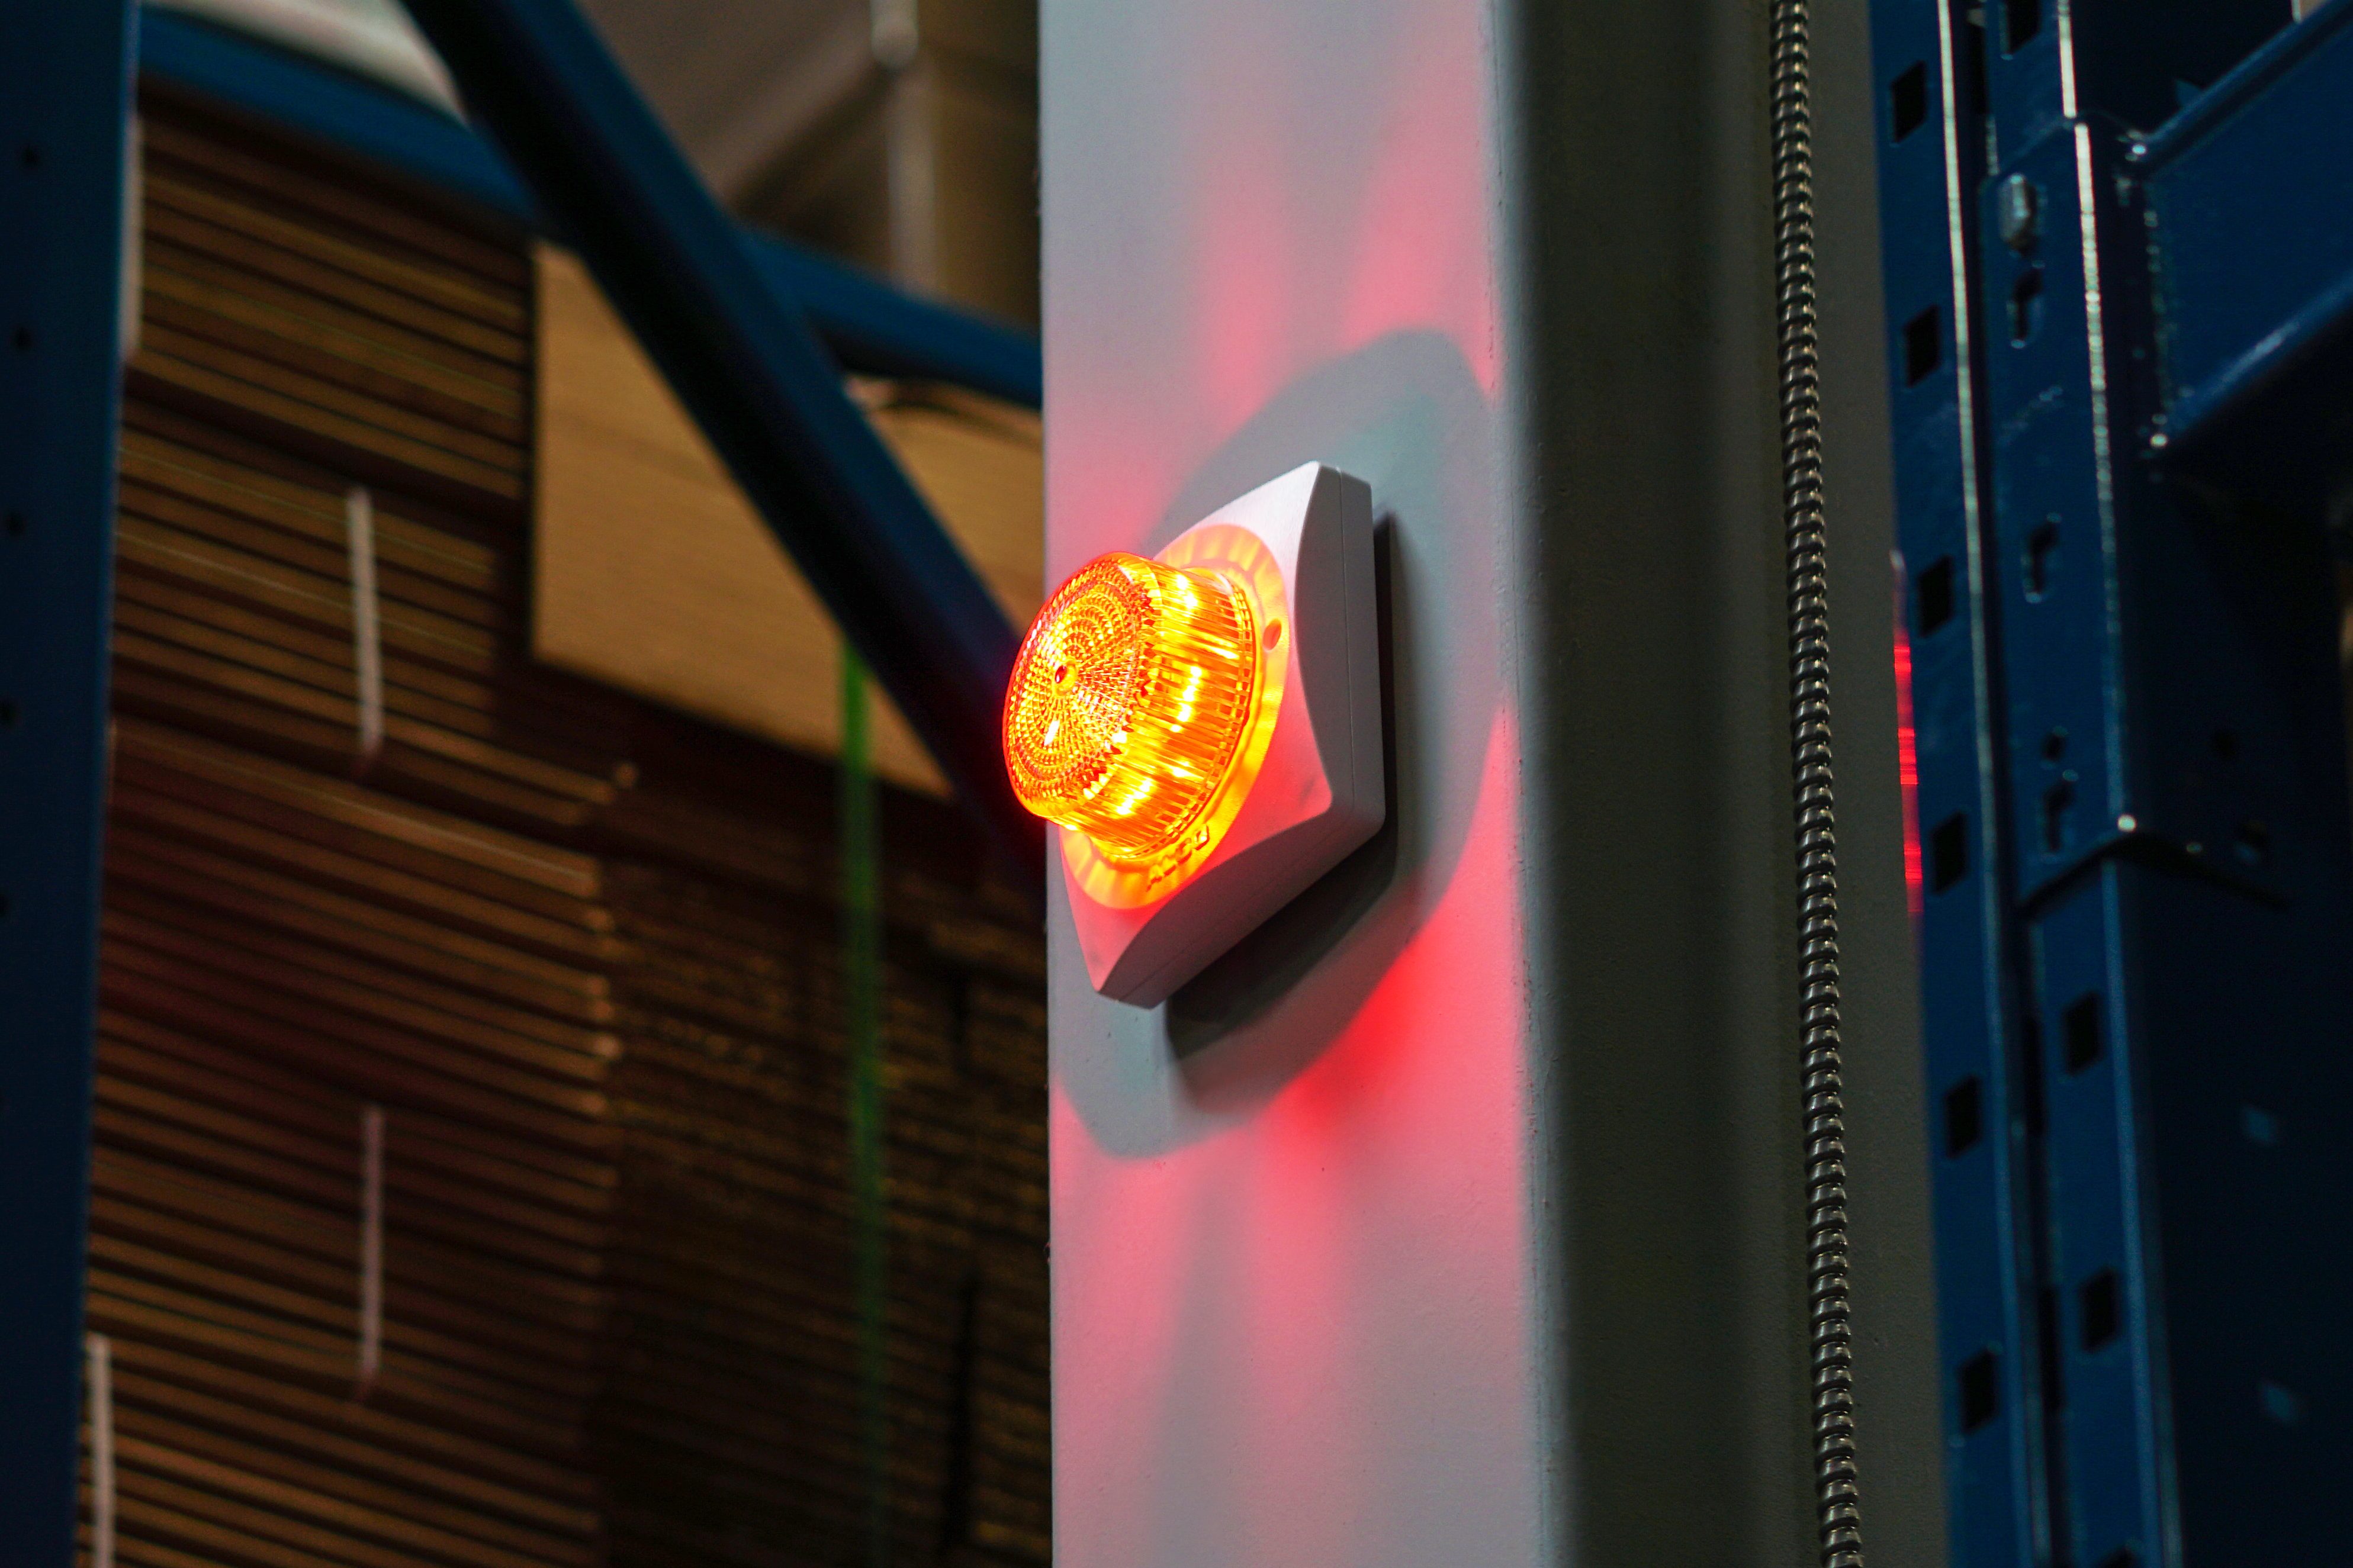 An image of an Algo 8138 visual alerter device securely mounted on a wall. The alerter is a square unit with a bright strobe light that can change colours and patters.